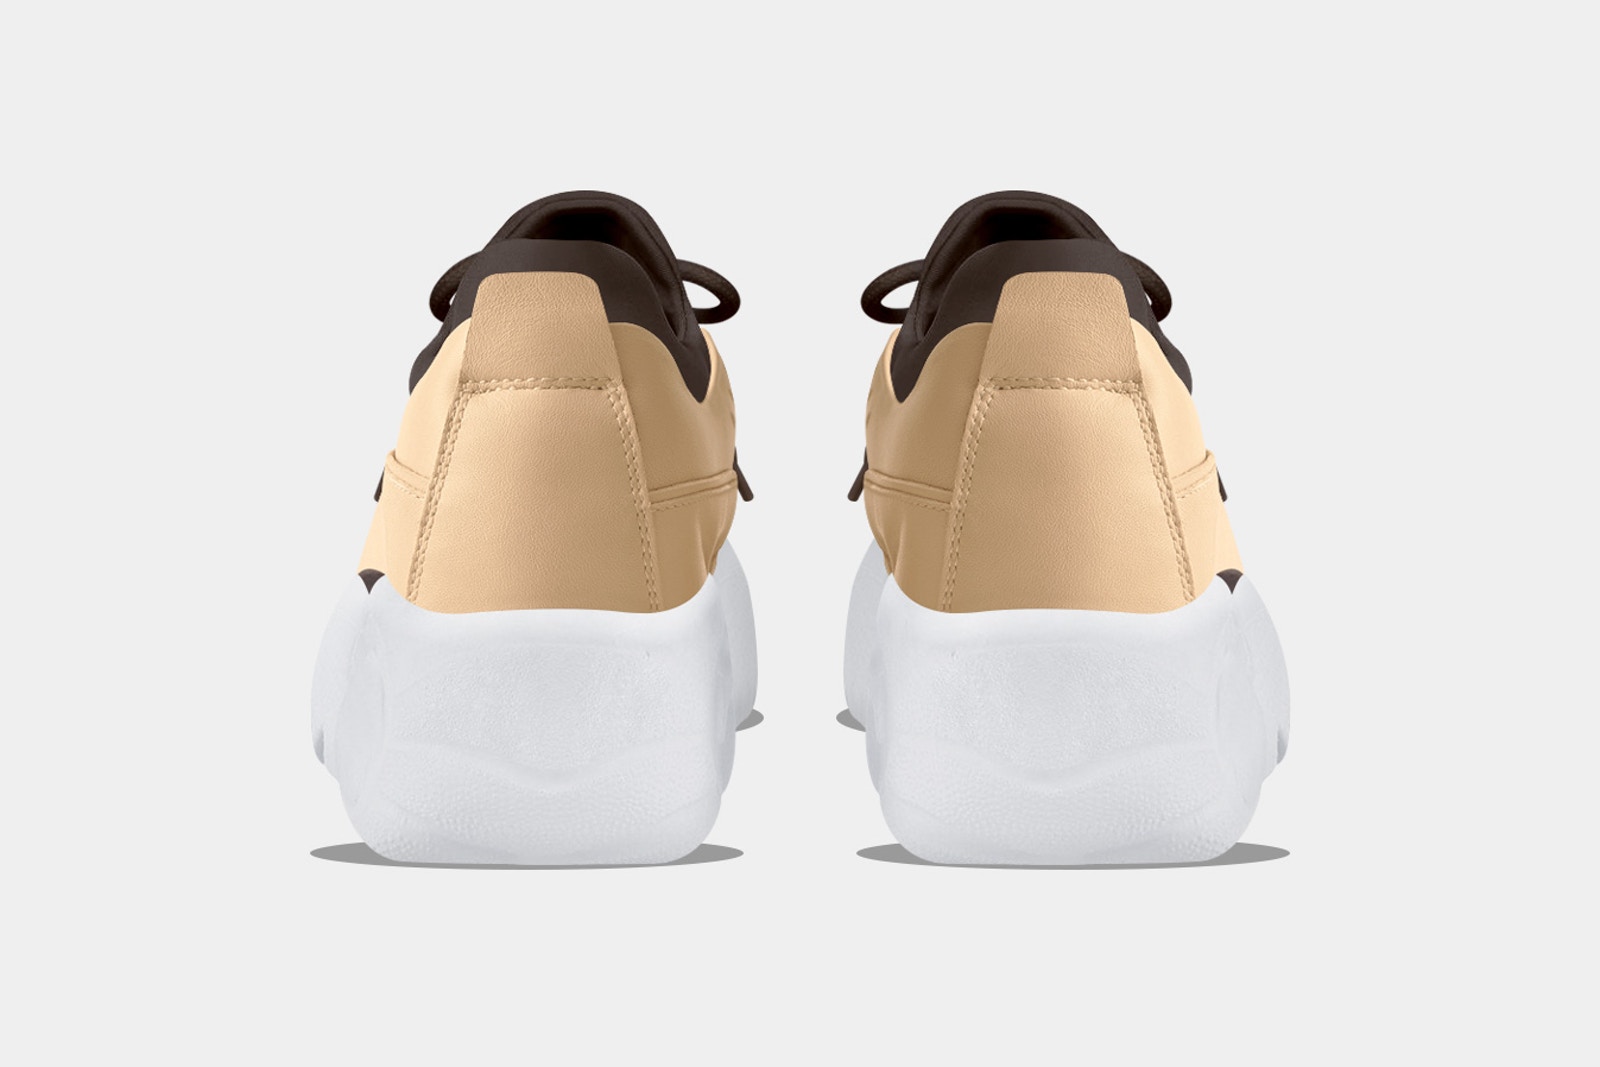 Chunky Sneakers Concept Designs Dad Shoes